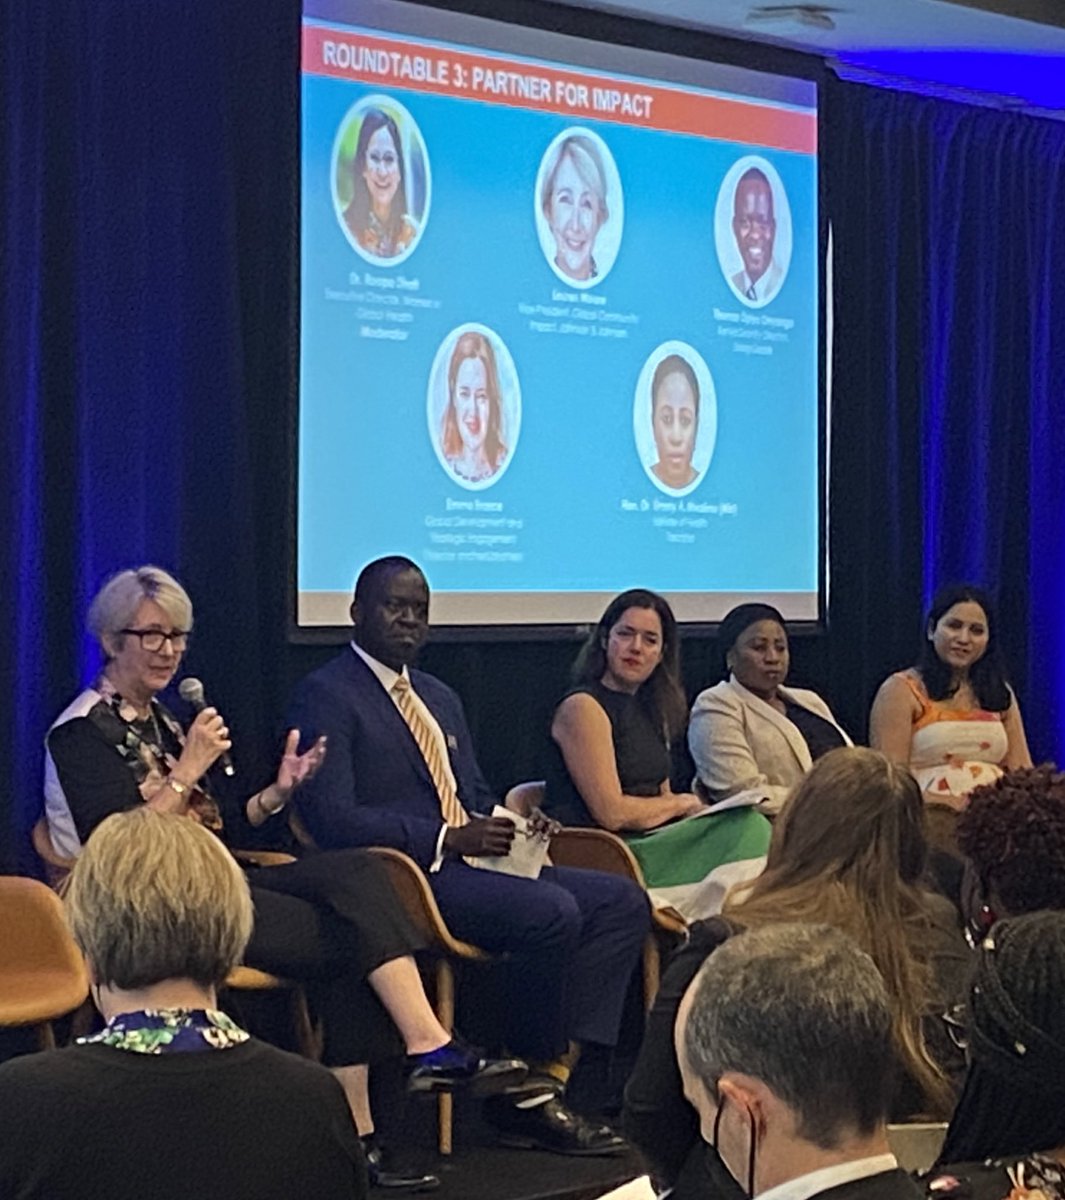 Successful partnerships begin with understanding what each partner hopes to achieve at the outset, says Lauren Moore, Vice President of Global Community Impact @JNJGlobalHealth, reflecting on the success of partnership workshops in #Kenya. @FHWCoalition #Unga #ActForHealthWorkers